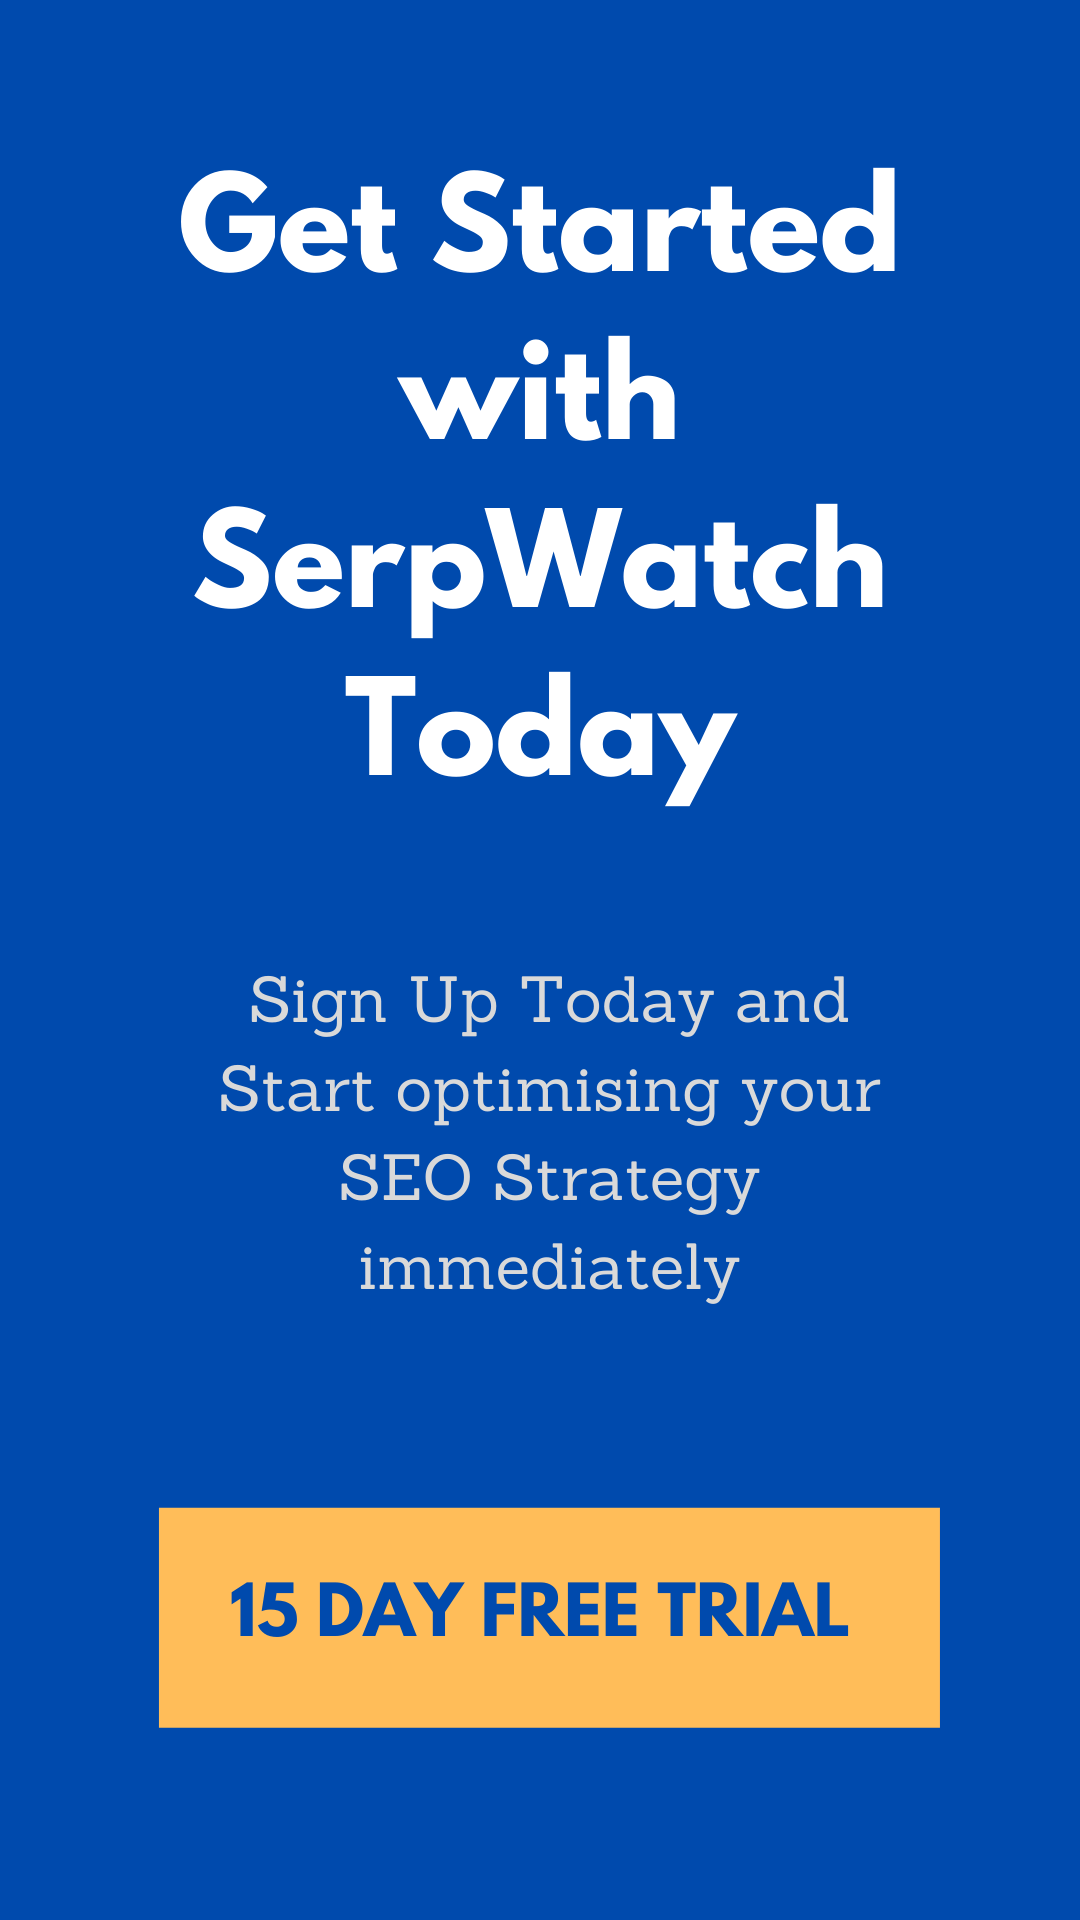 Get Started with SERPwatch Today